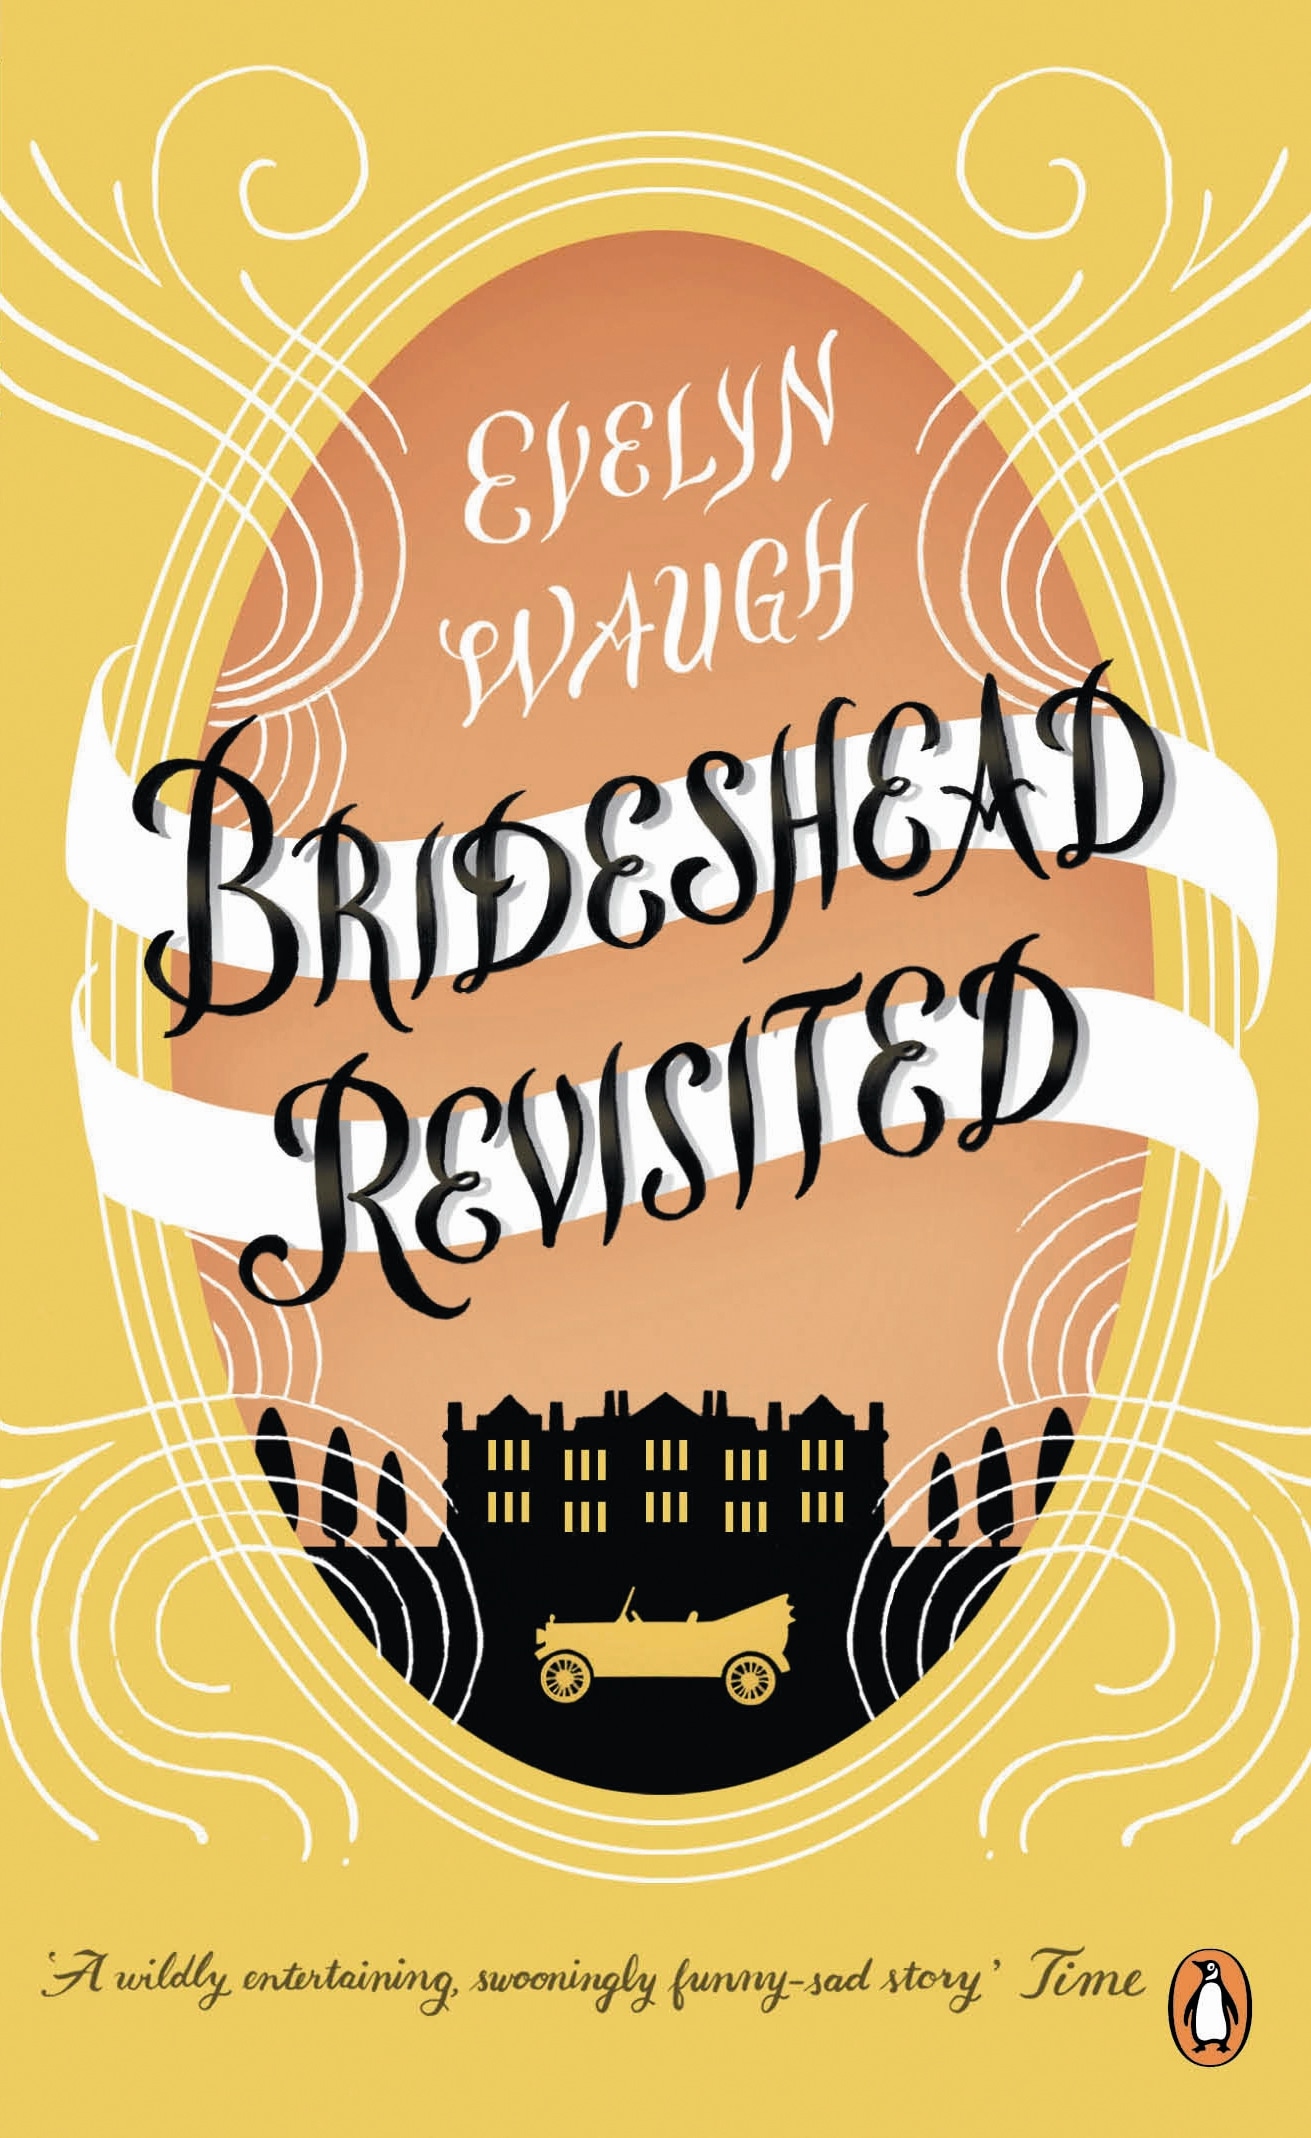 Book “Brideshead Revisited” by Evelyn Waugh — April 7, 2011